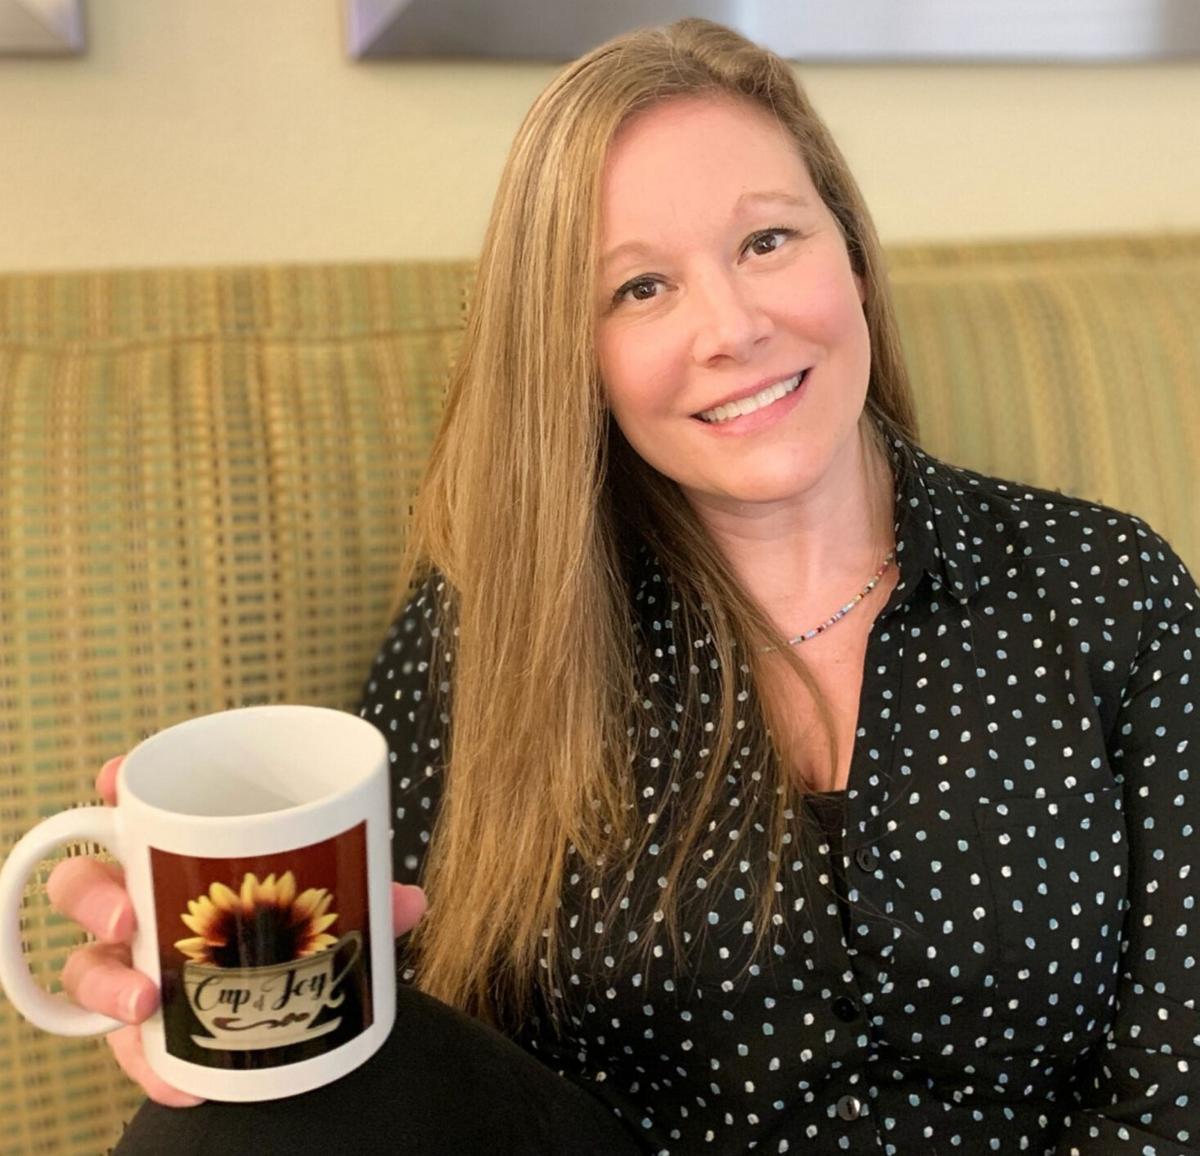 Small Business Startup A Cup Of Joy Top Stories Nny360 Com